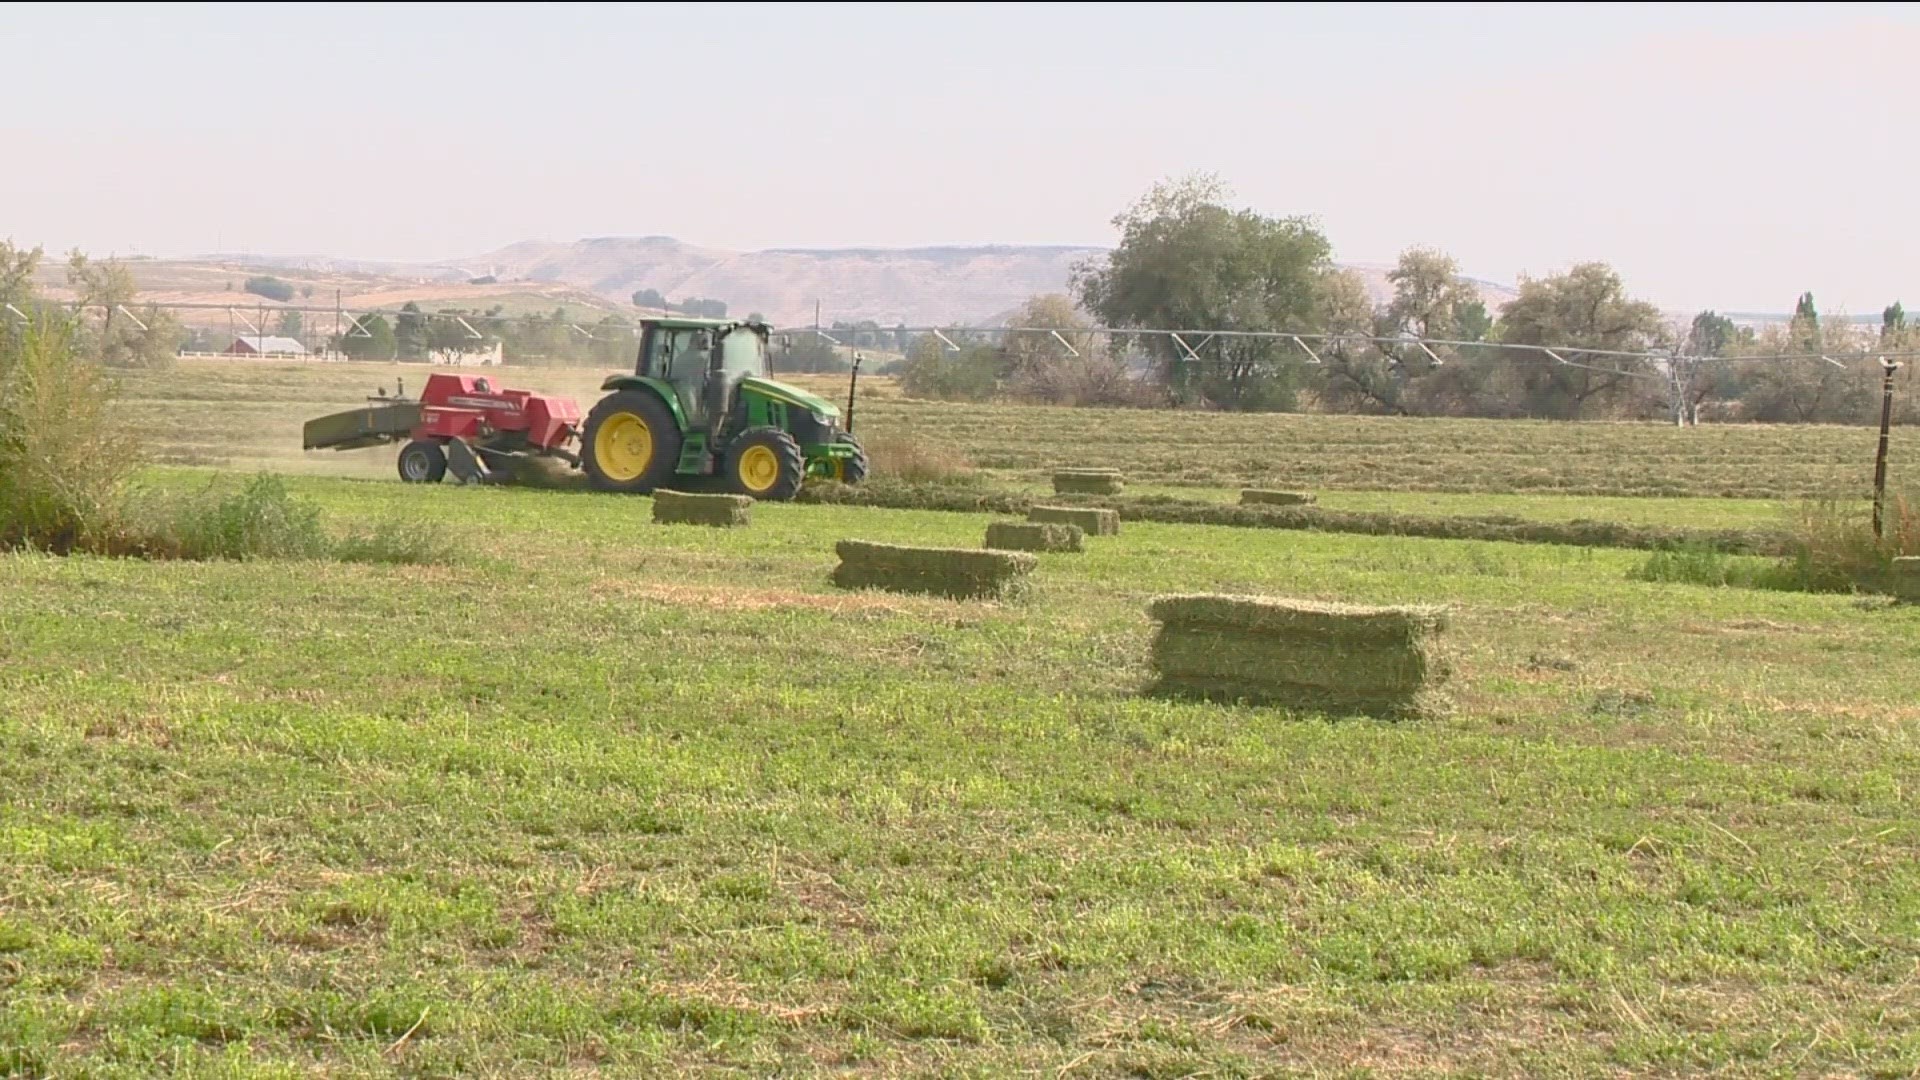 The Treasure Valley has fewer custom hay workers because people are retiring and equipment costs are increasing.